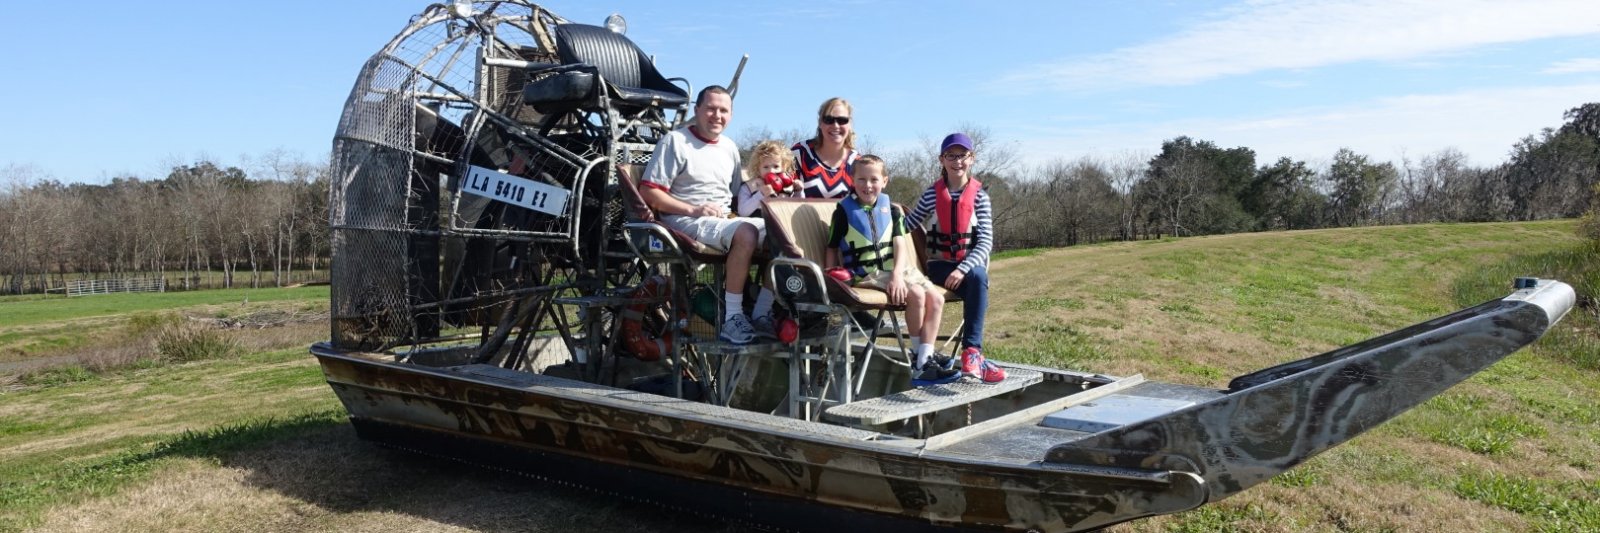 family sitting on an airboat